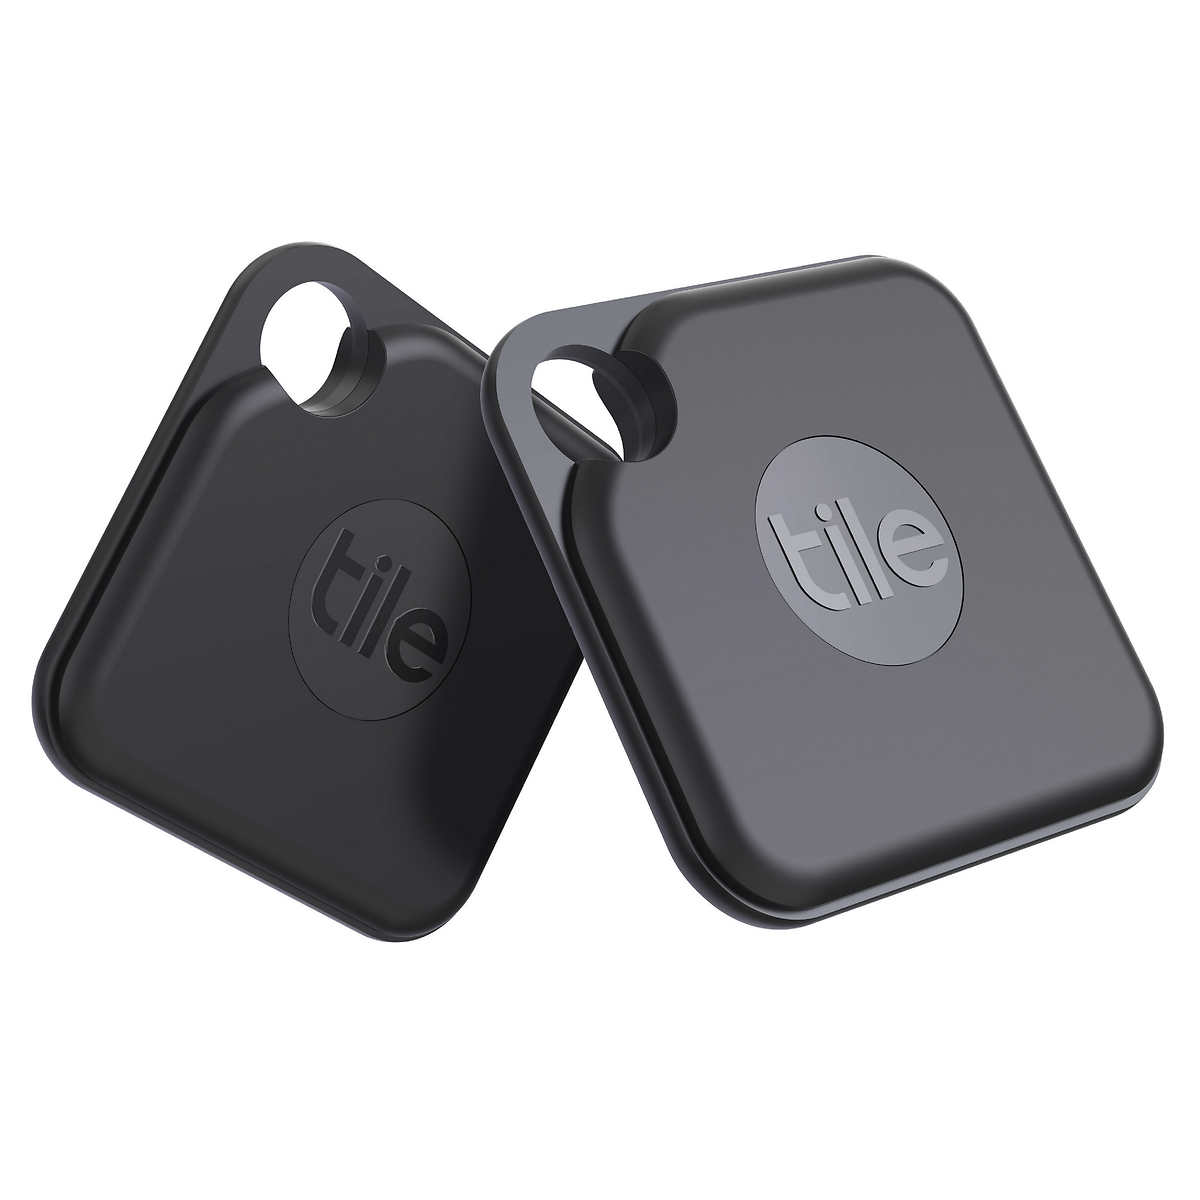 Tile Pro 2020 Bluetooth Tracker 2 Pack Costco